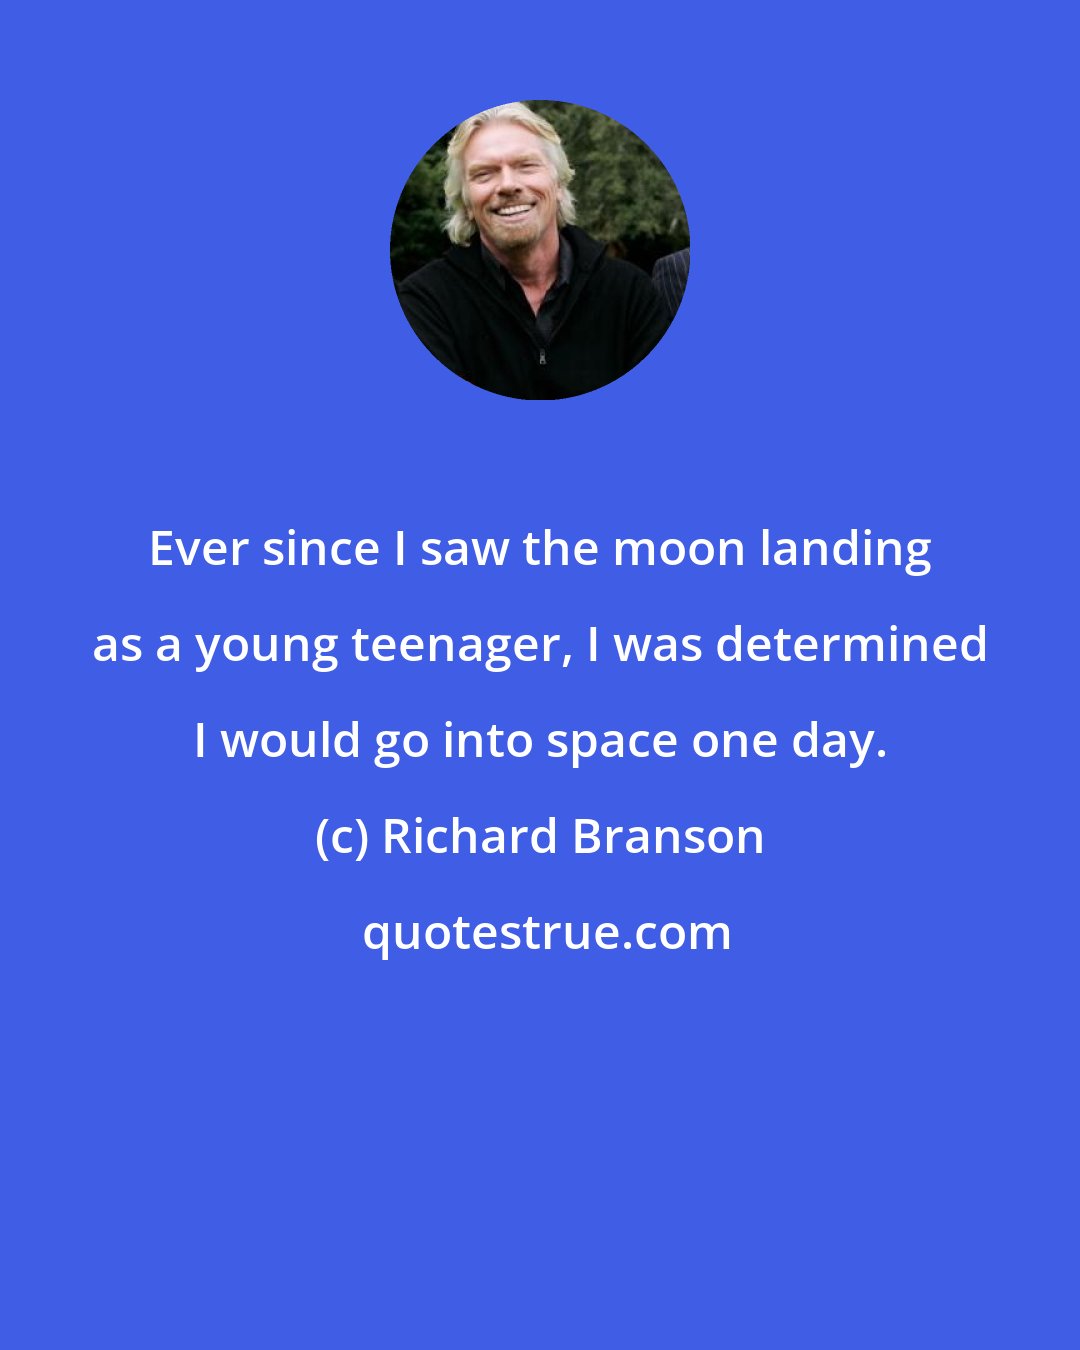 Richard Branson: Ever since I saw the moon landing as a young teenager, I was determined I would go into space one day.